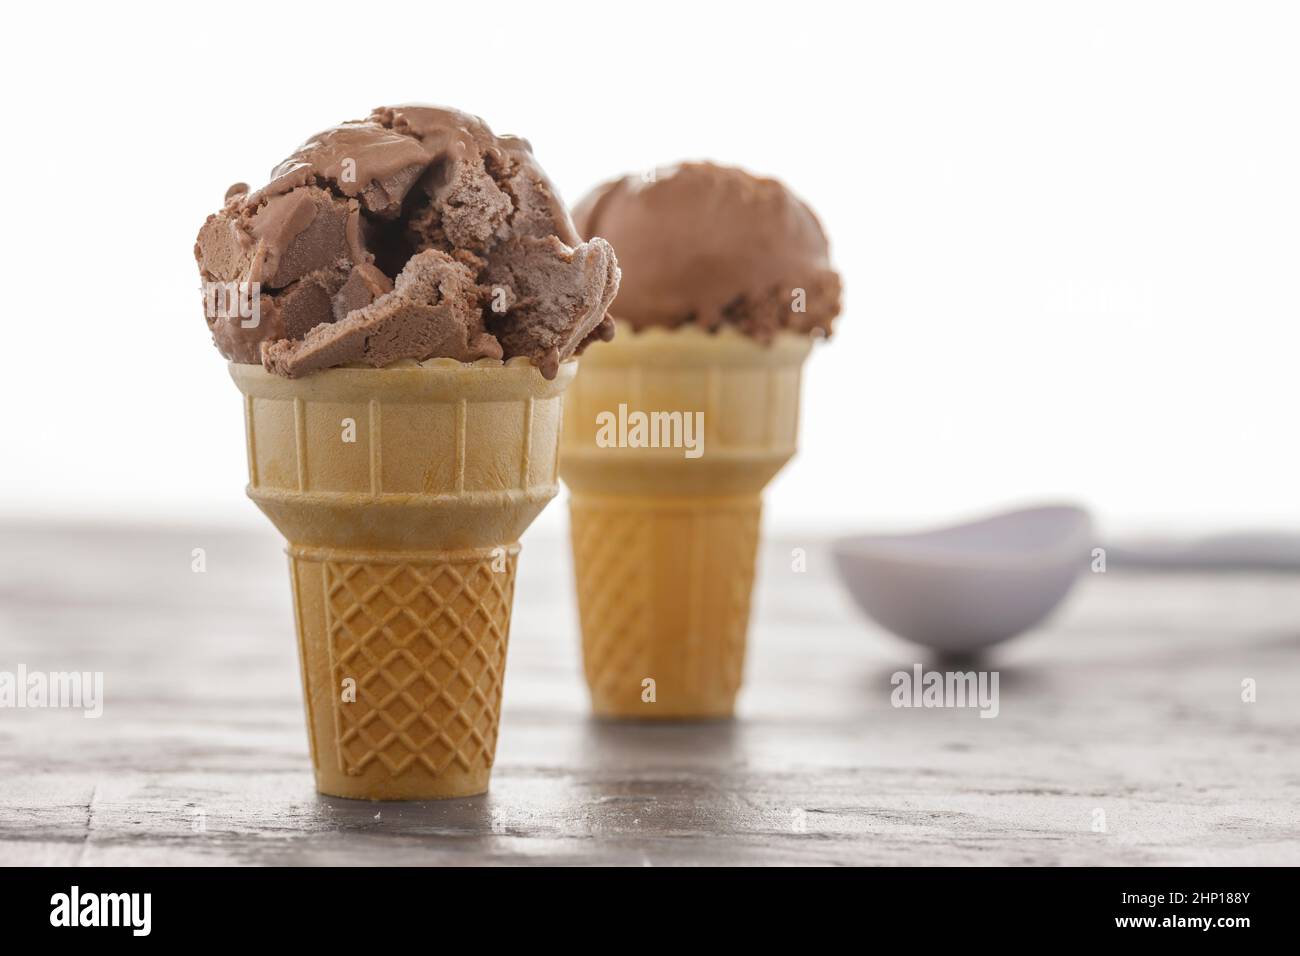 A close up of two chocolate ice cream cones. Stock Photo